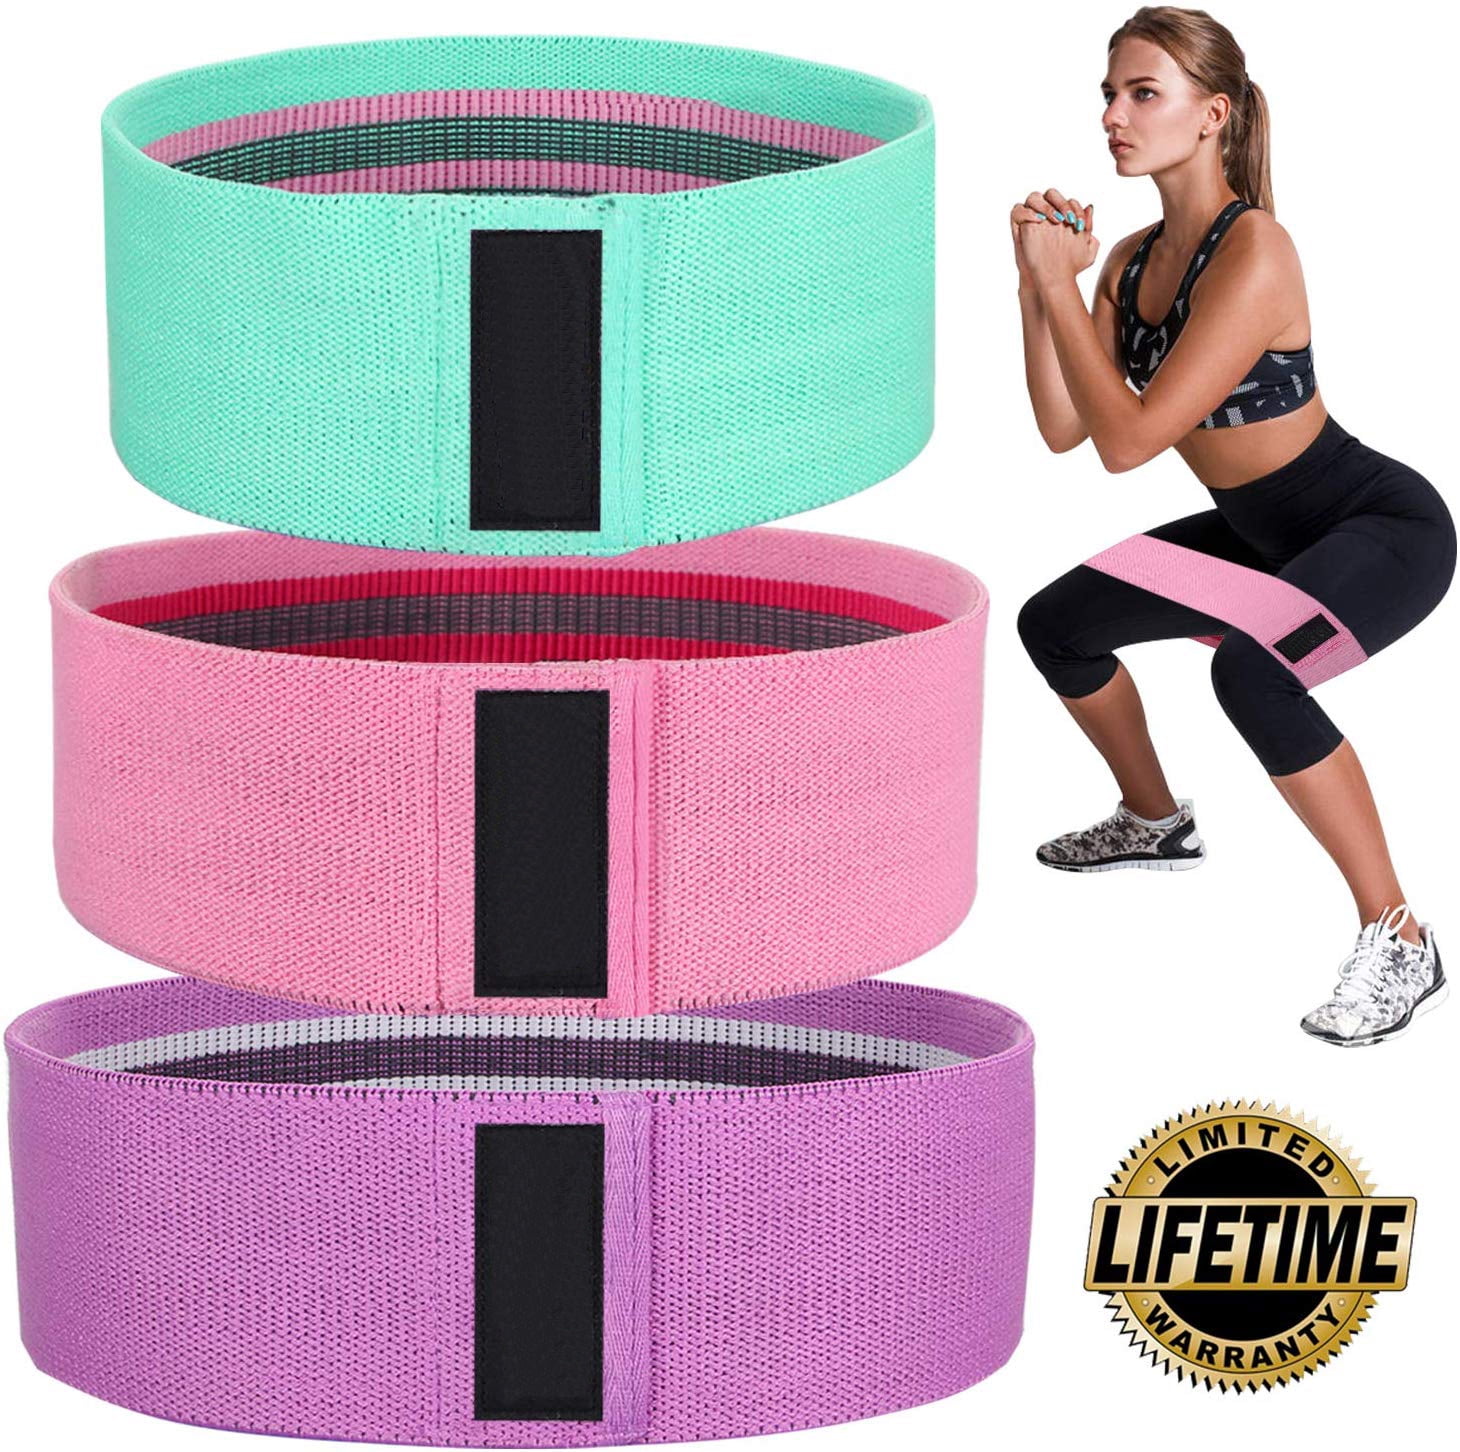 Slim Gym Booty Glute Gym Pack Barbell Pad and Booty Loop Bands Peachy Pack 